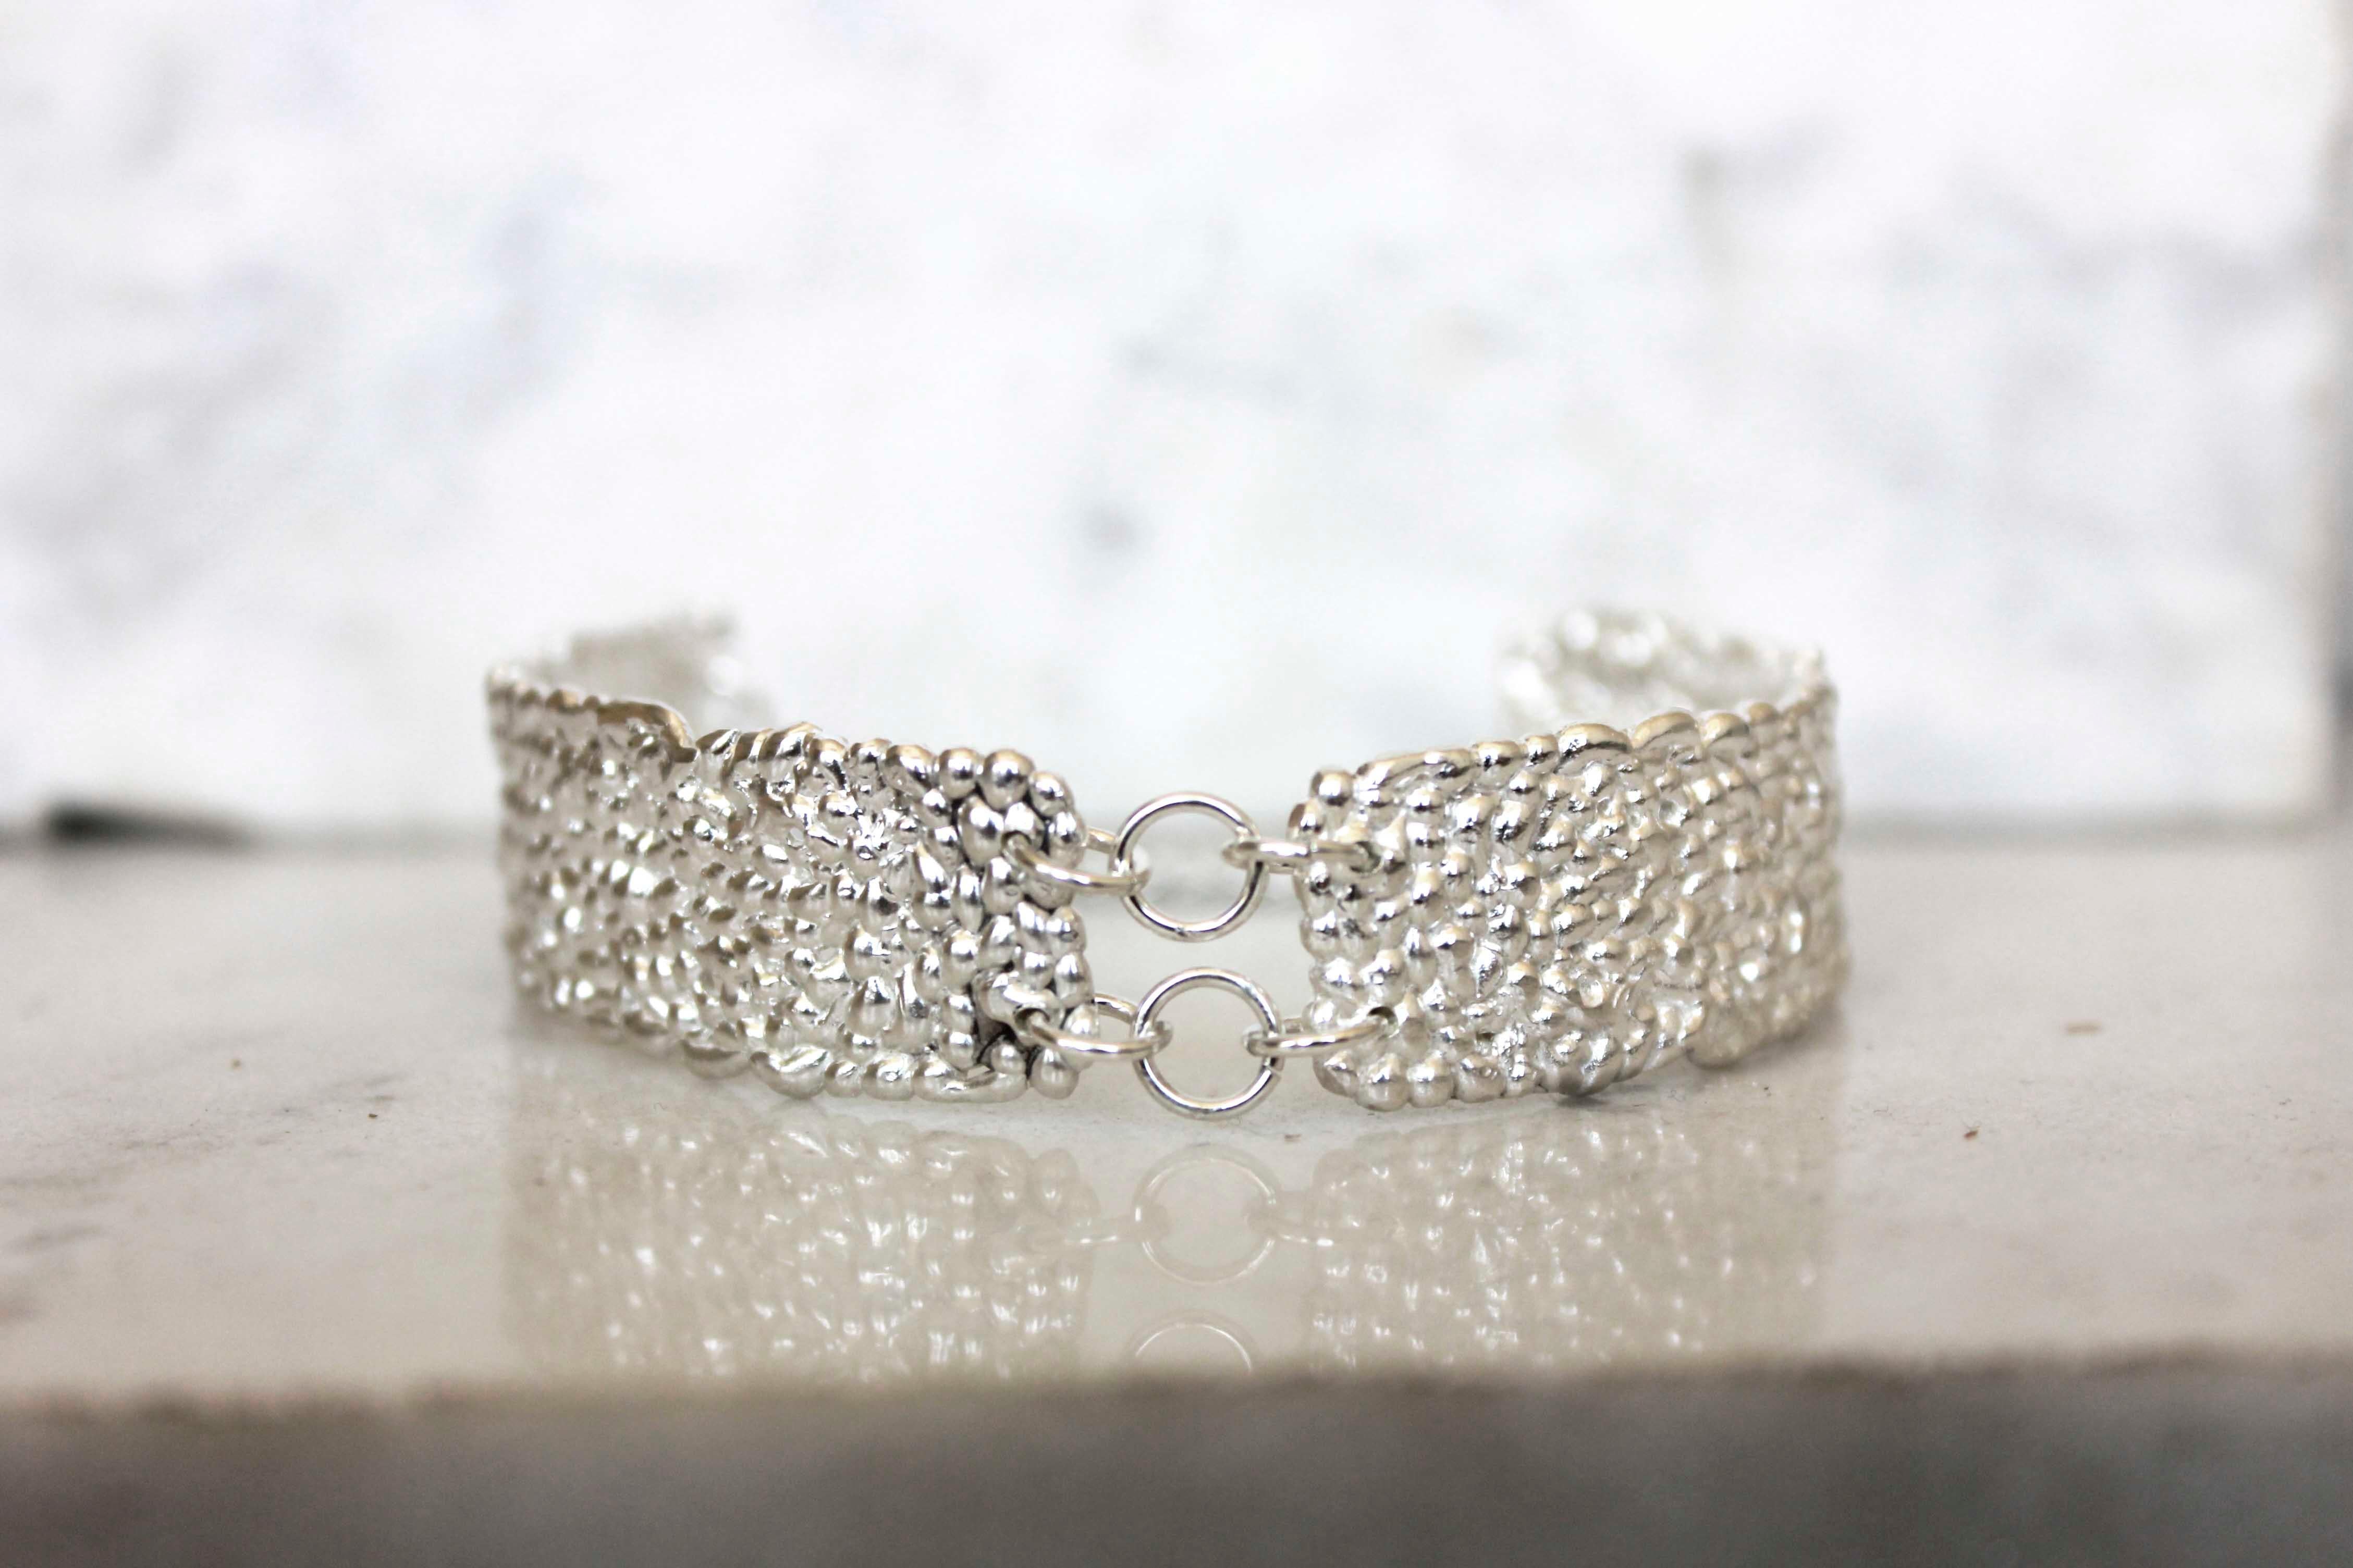 Bubbles chunky bracelet

A chunky silver bracelet with a textured organic feel.

A statement bracelet that is made of little tiny different size droplets in sterling silver that create an incredible sparkle which draw attention.